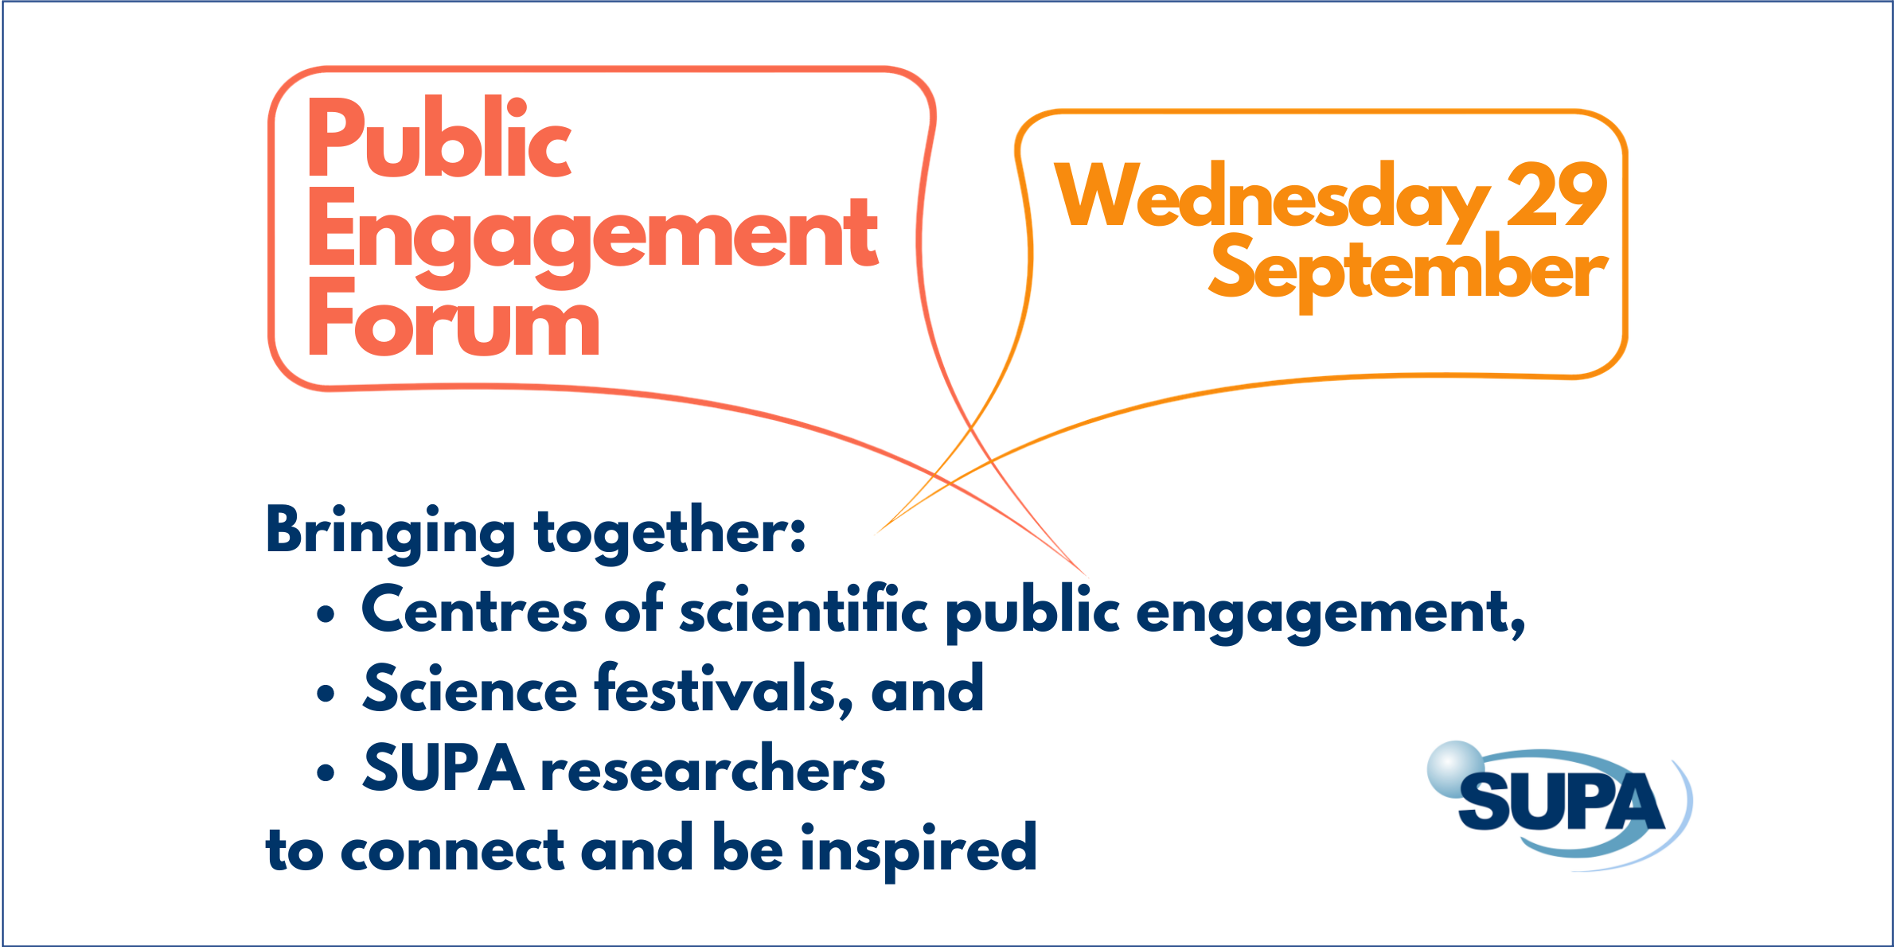 Public Engagement Forum, Weds 29 September. Bringing together centres of scientific public engagement, science festivals and SUPA researchers to connect and be inspired.